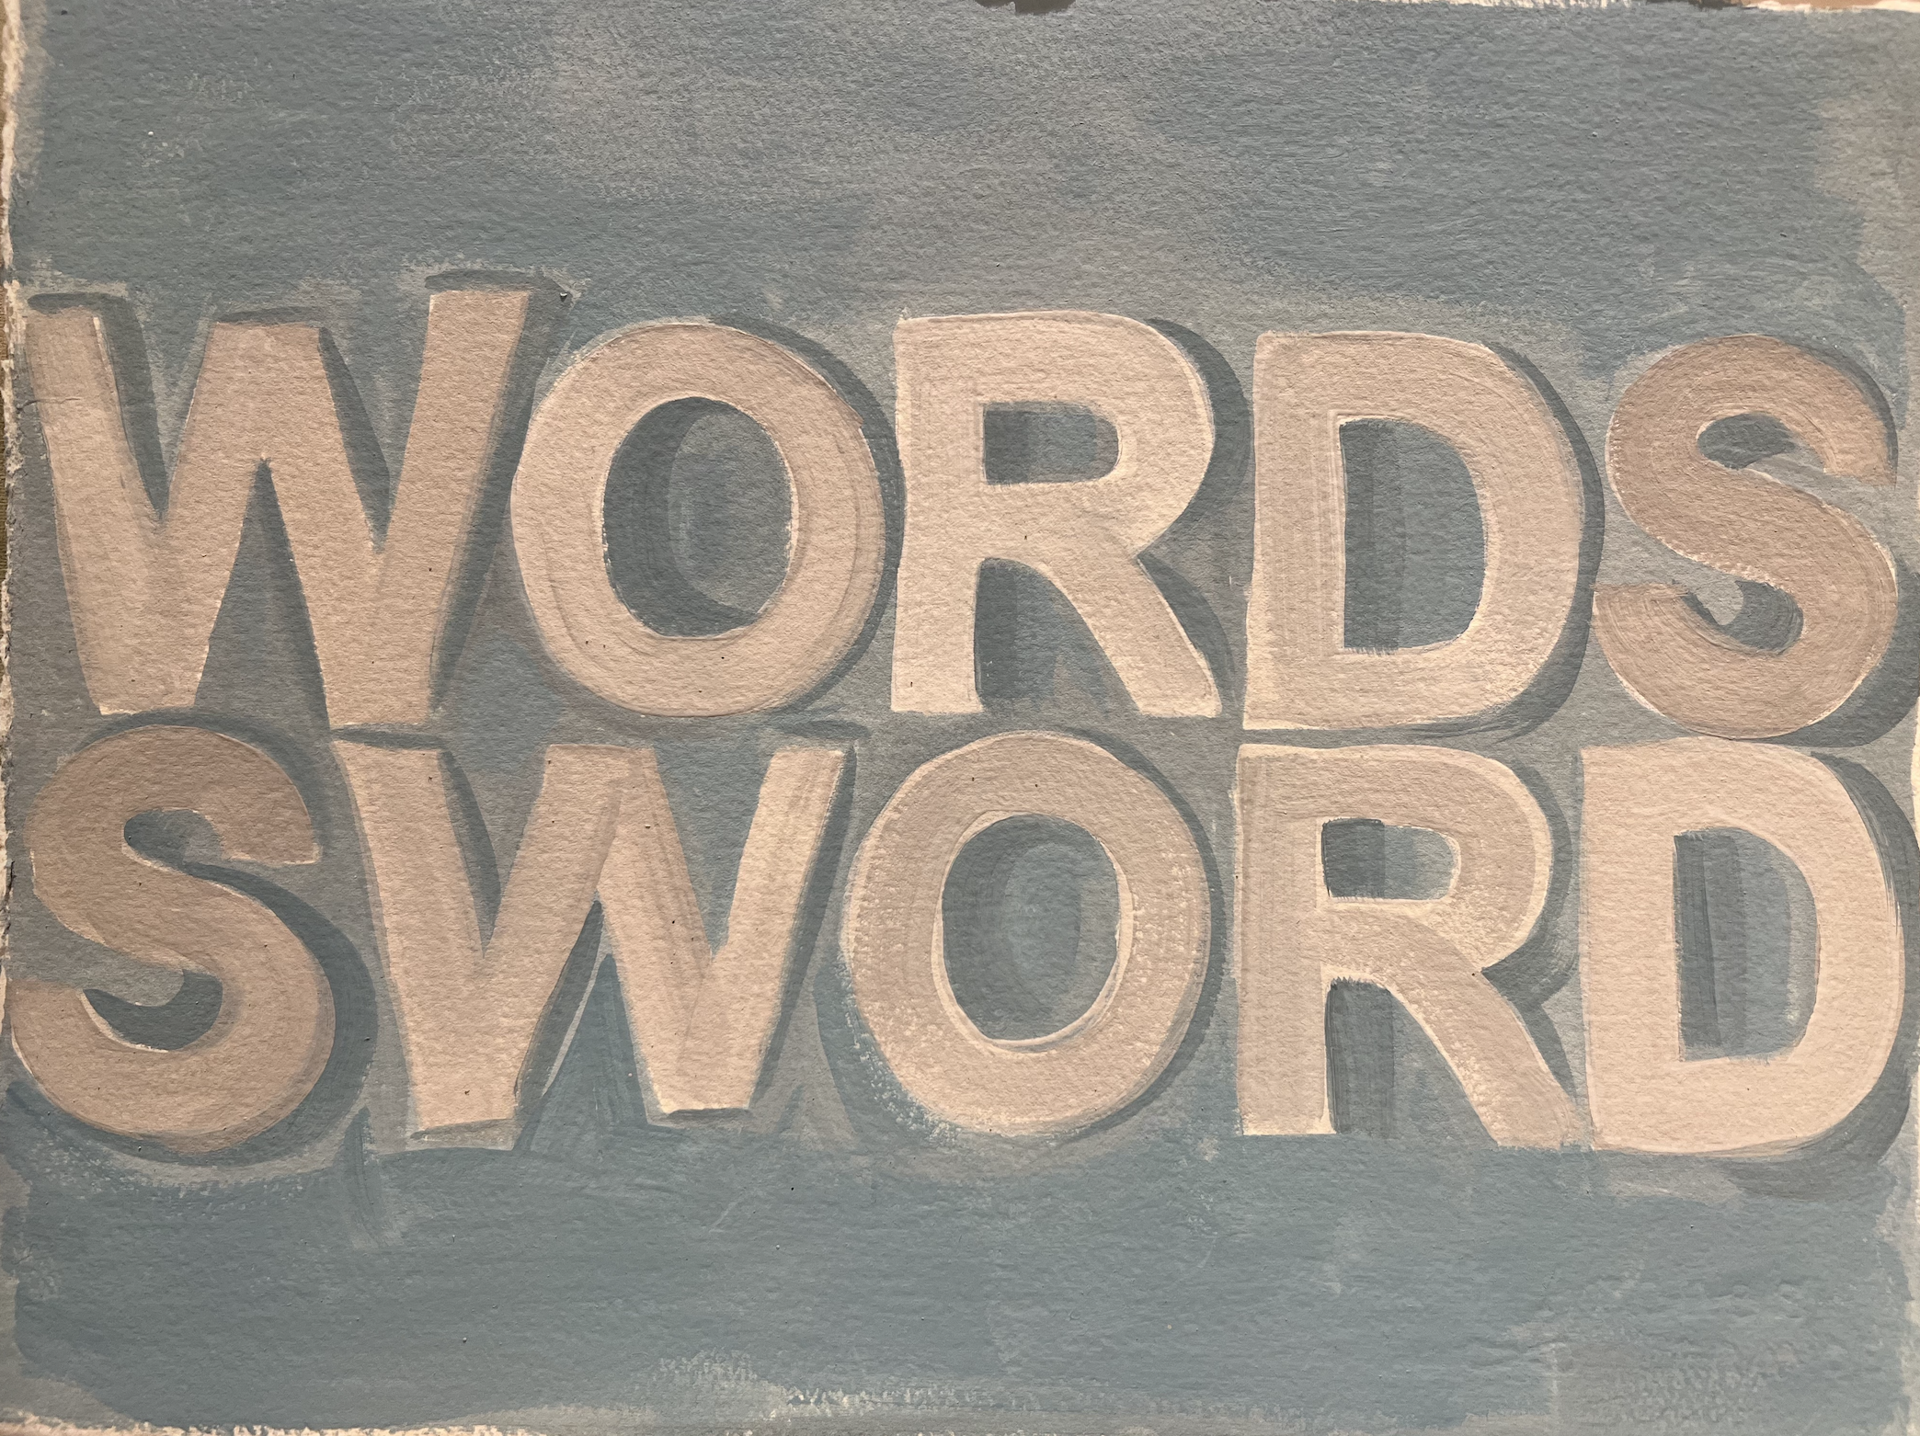 WORDS SWORD Blue Grey by Sunny Goode